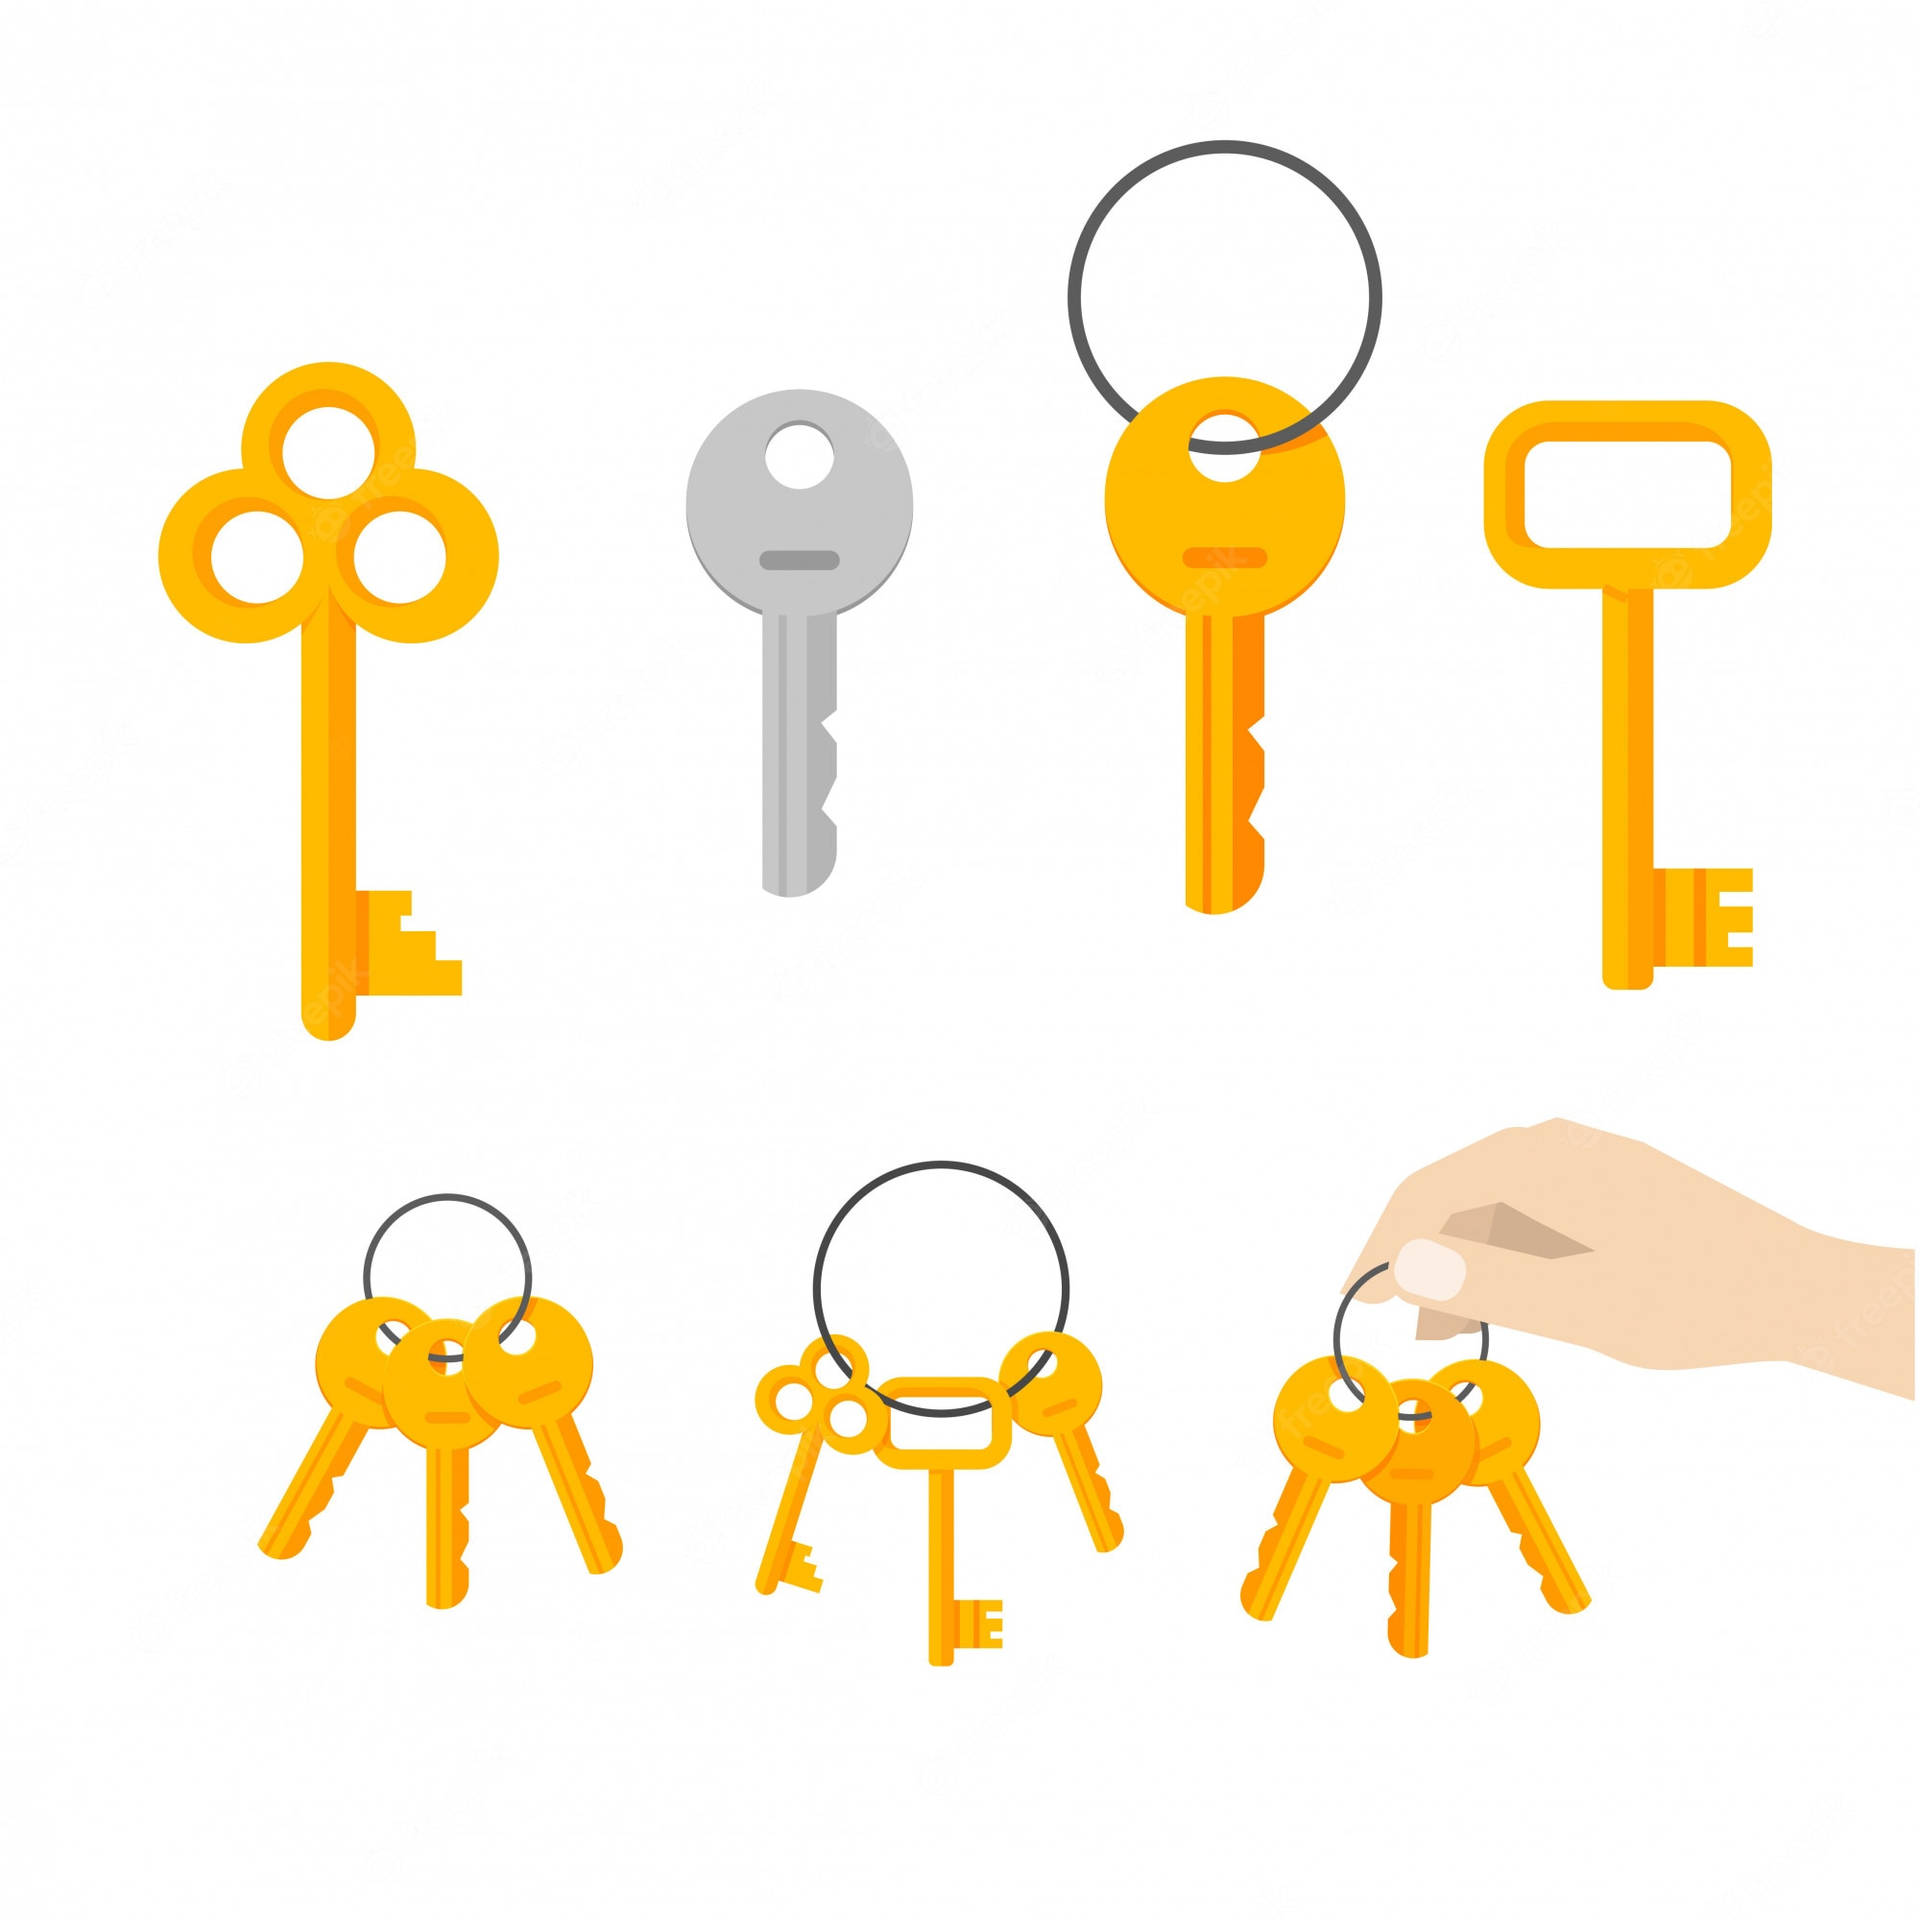 Various Key Designs And Types Wallpaper